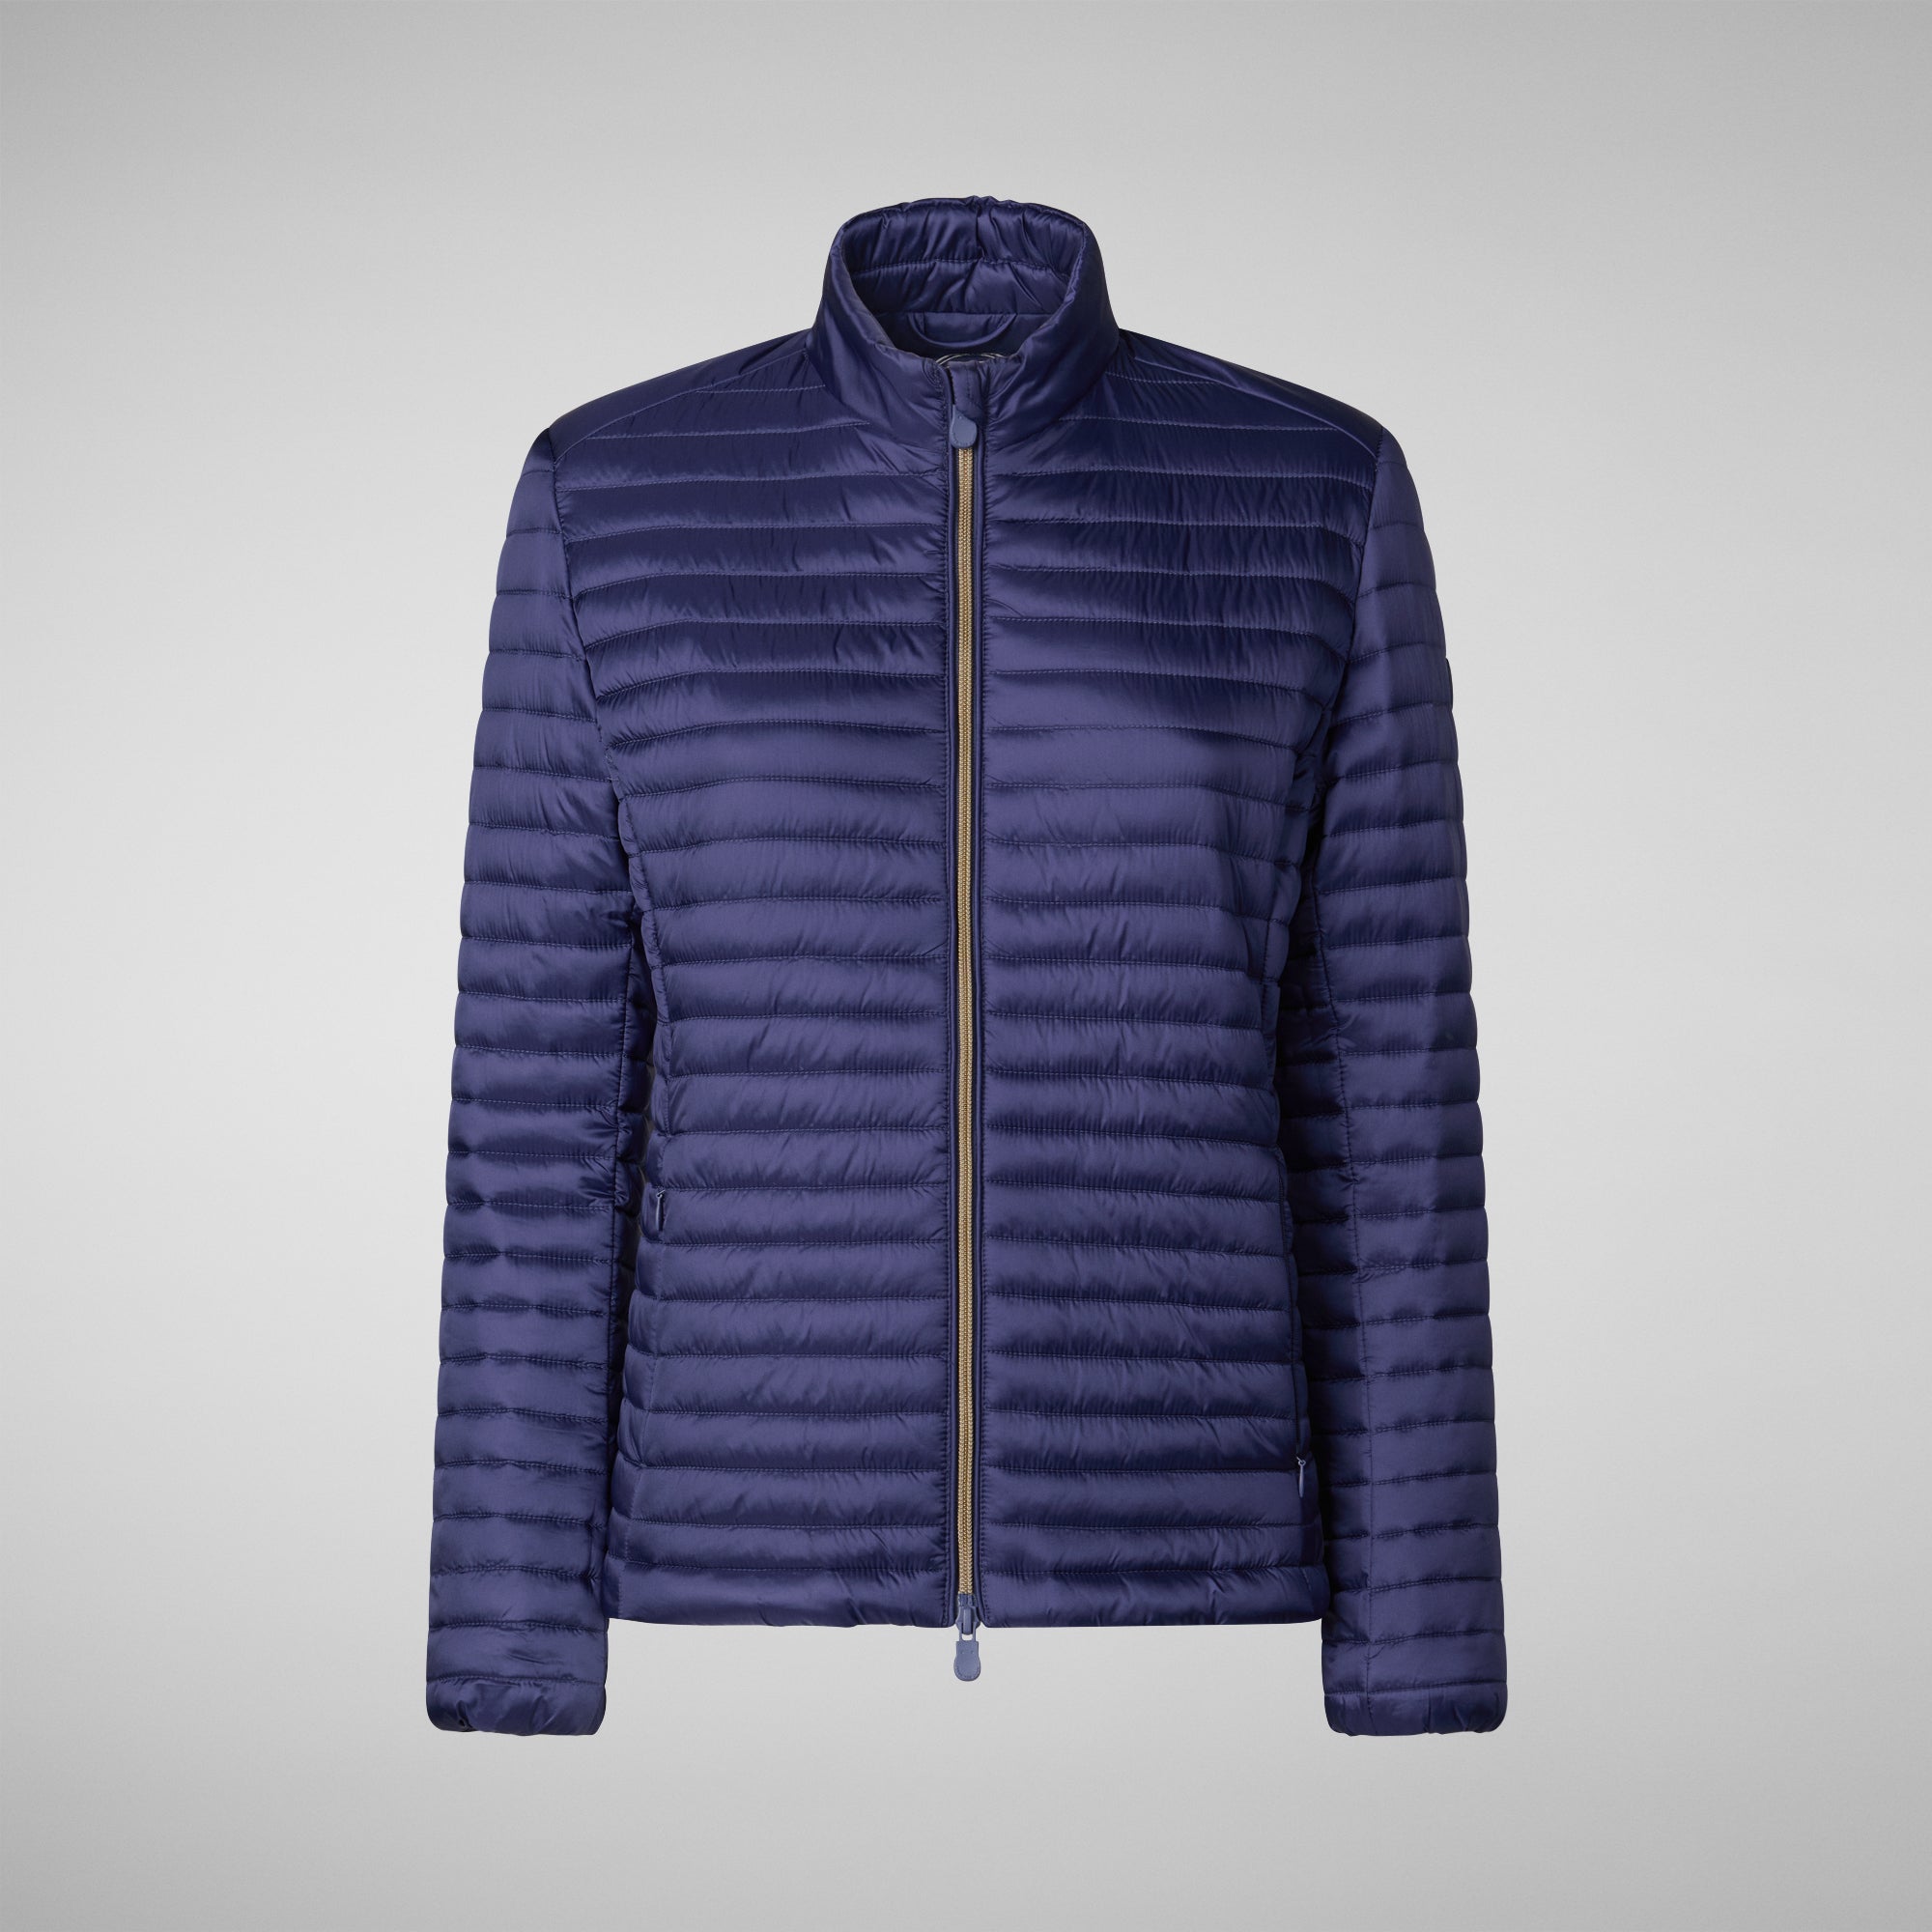 ANDREINA:SAVE THE DUCK WOMAN JACKET in IRIS in Navy Blue - Save 